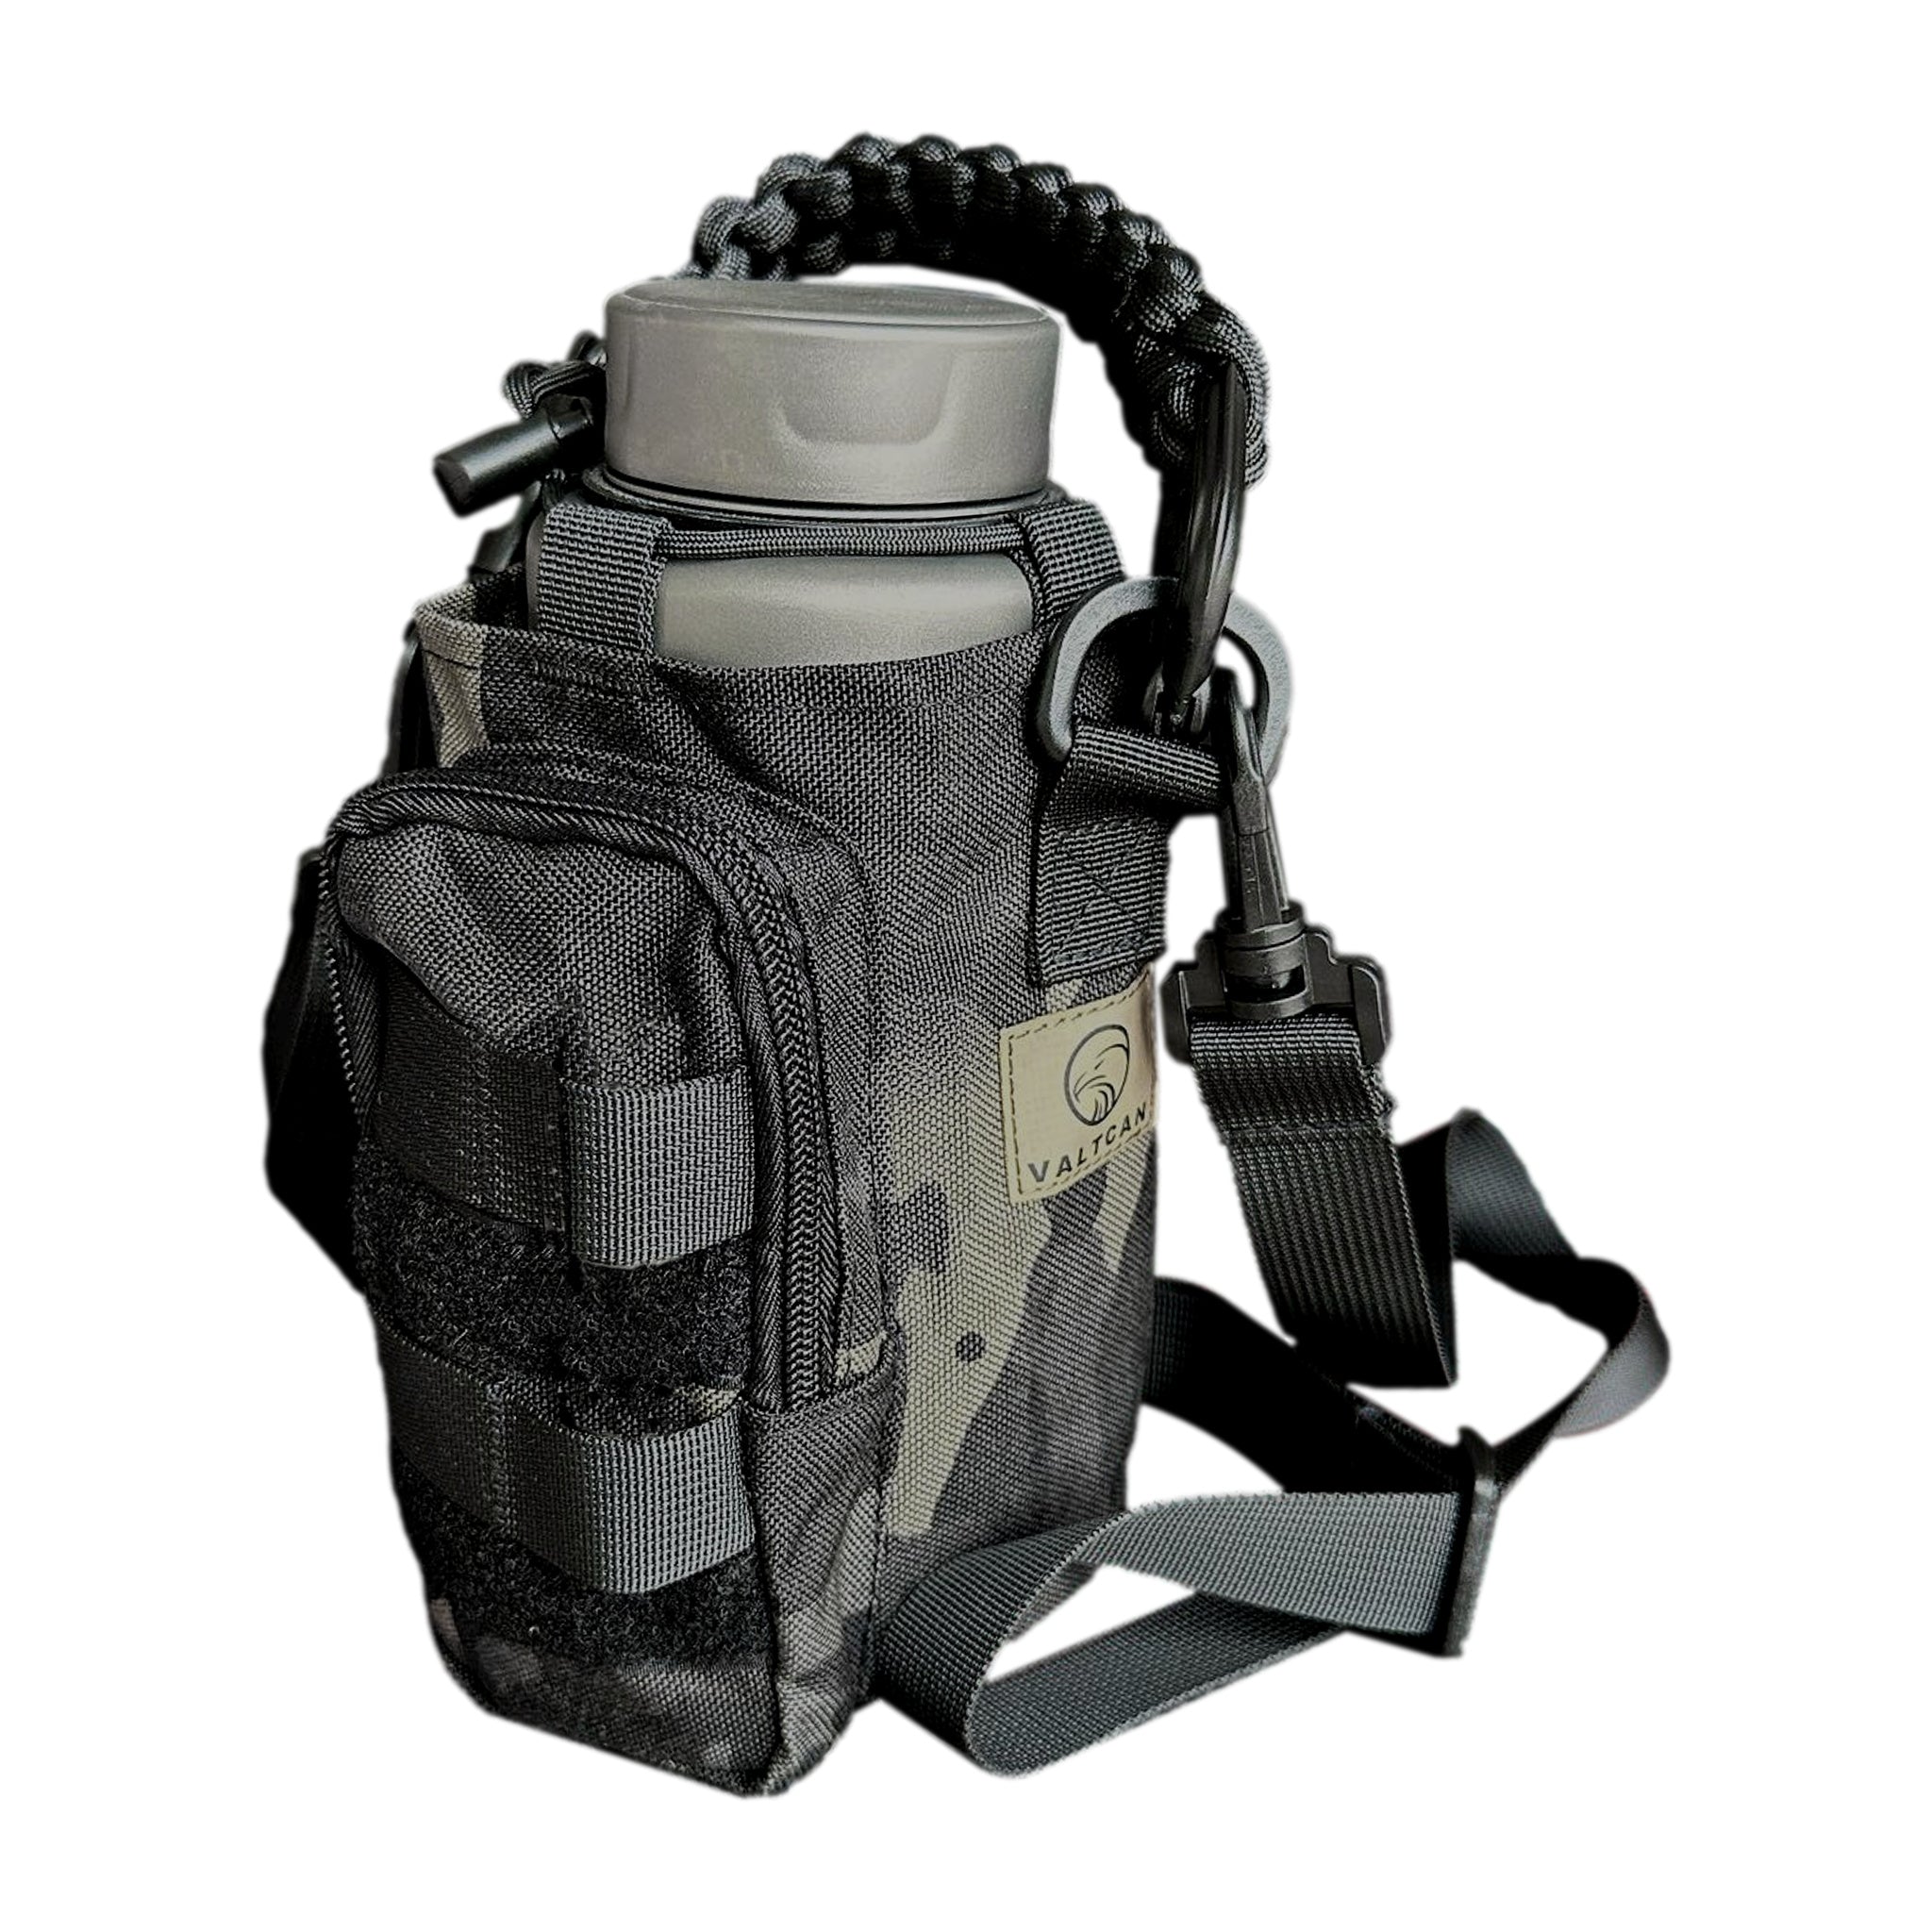 ROTHCO MOLLE COMPATIBLE WATER BOTTLE POUCH